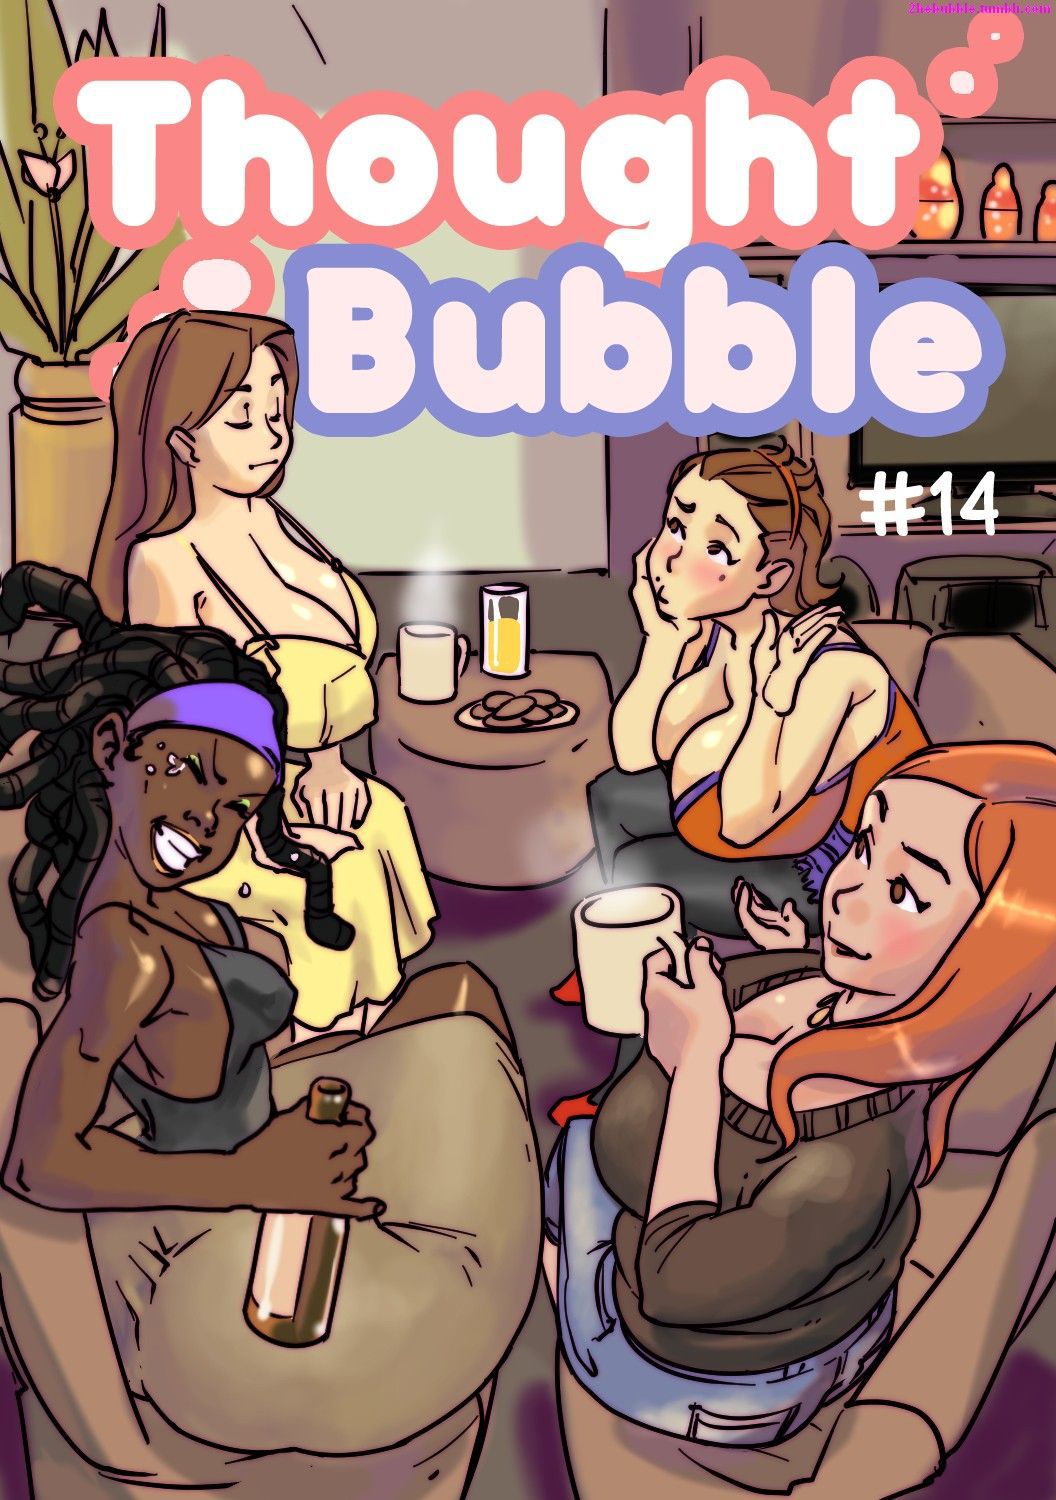 [Sidneymt] Thought Bubble #14-15-16-17 [Ongoing] 1